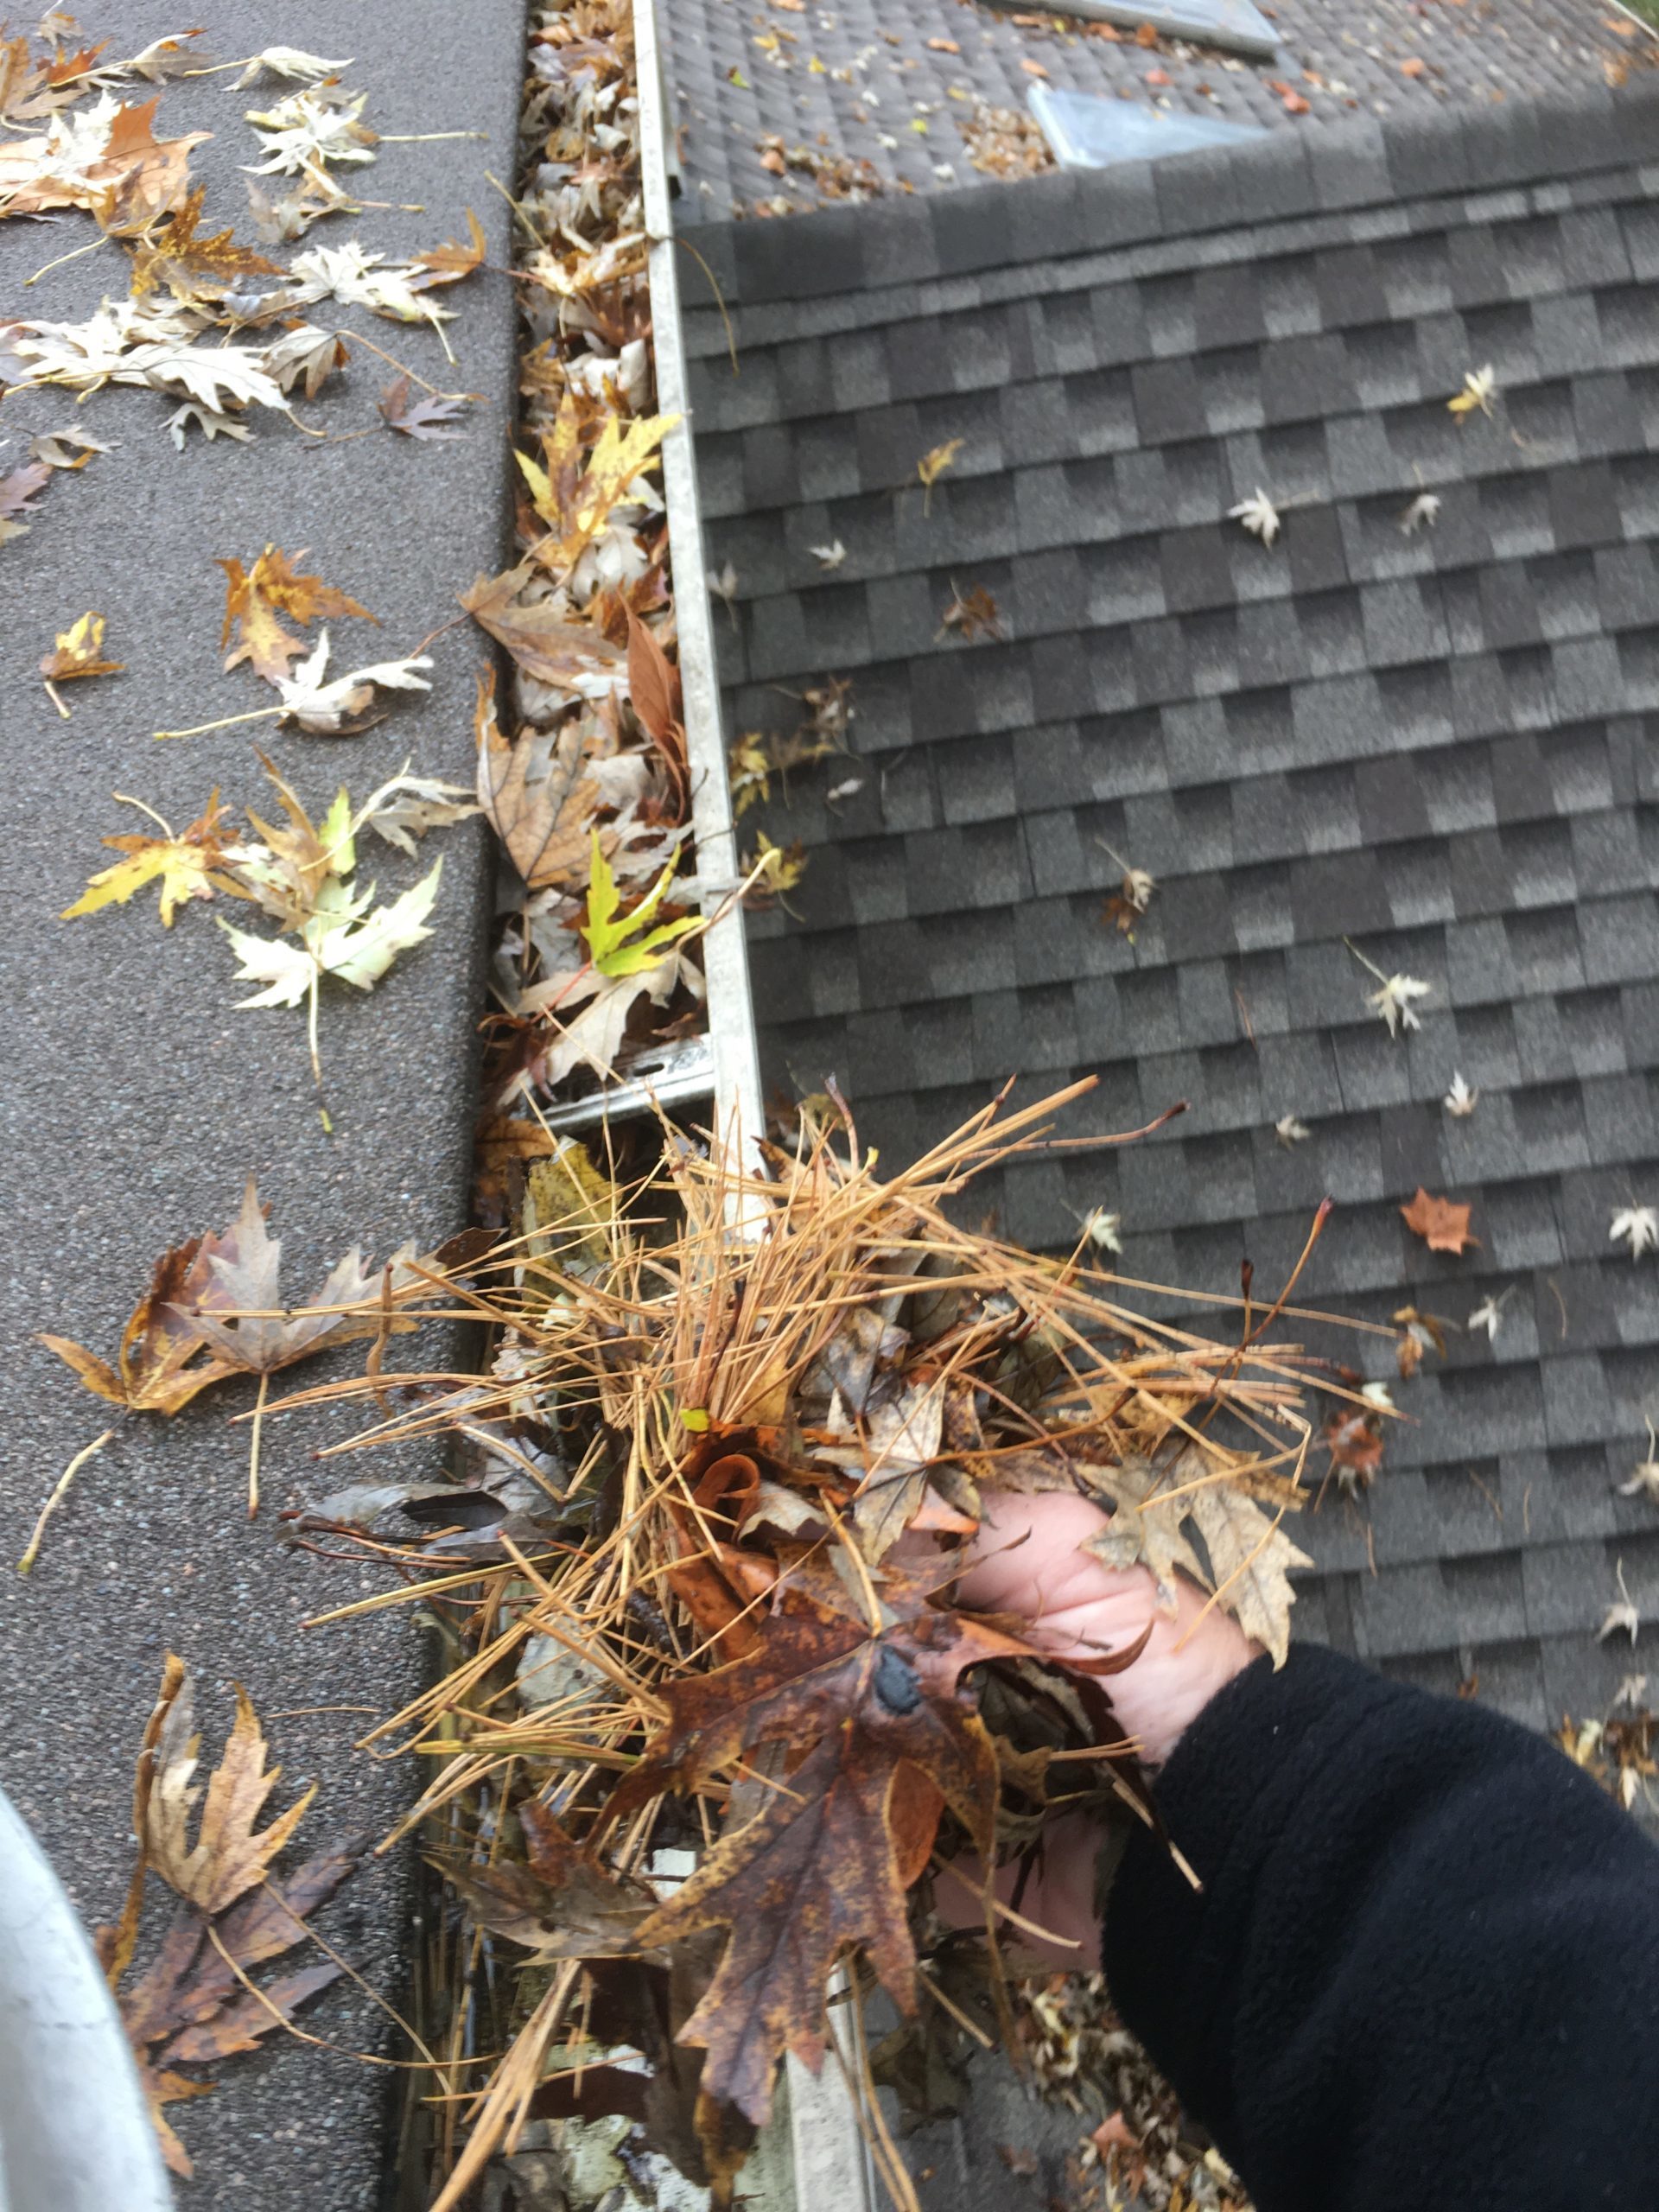 Cleaning out fall leaves and pine needles from gutter